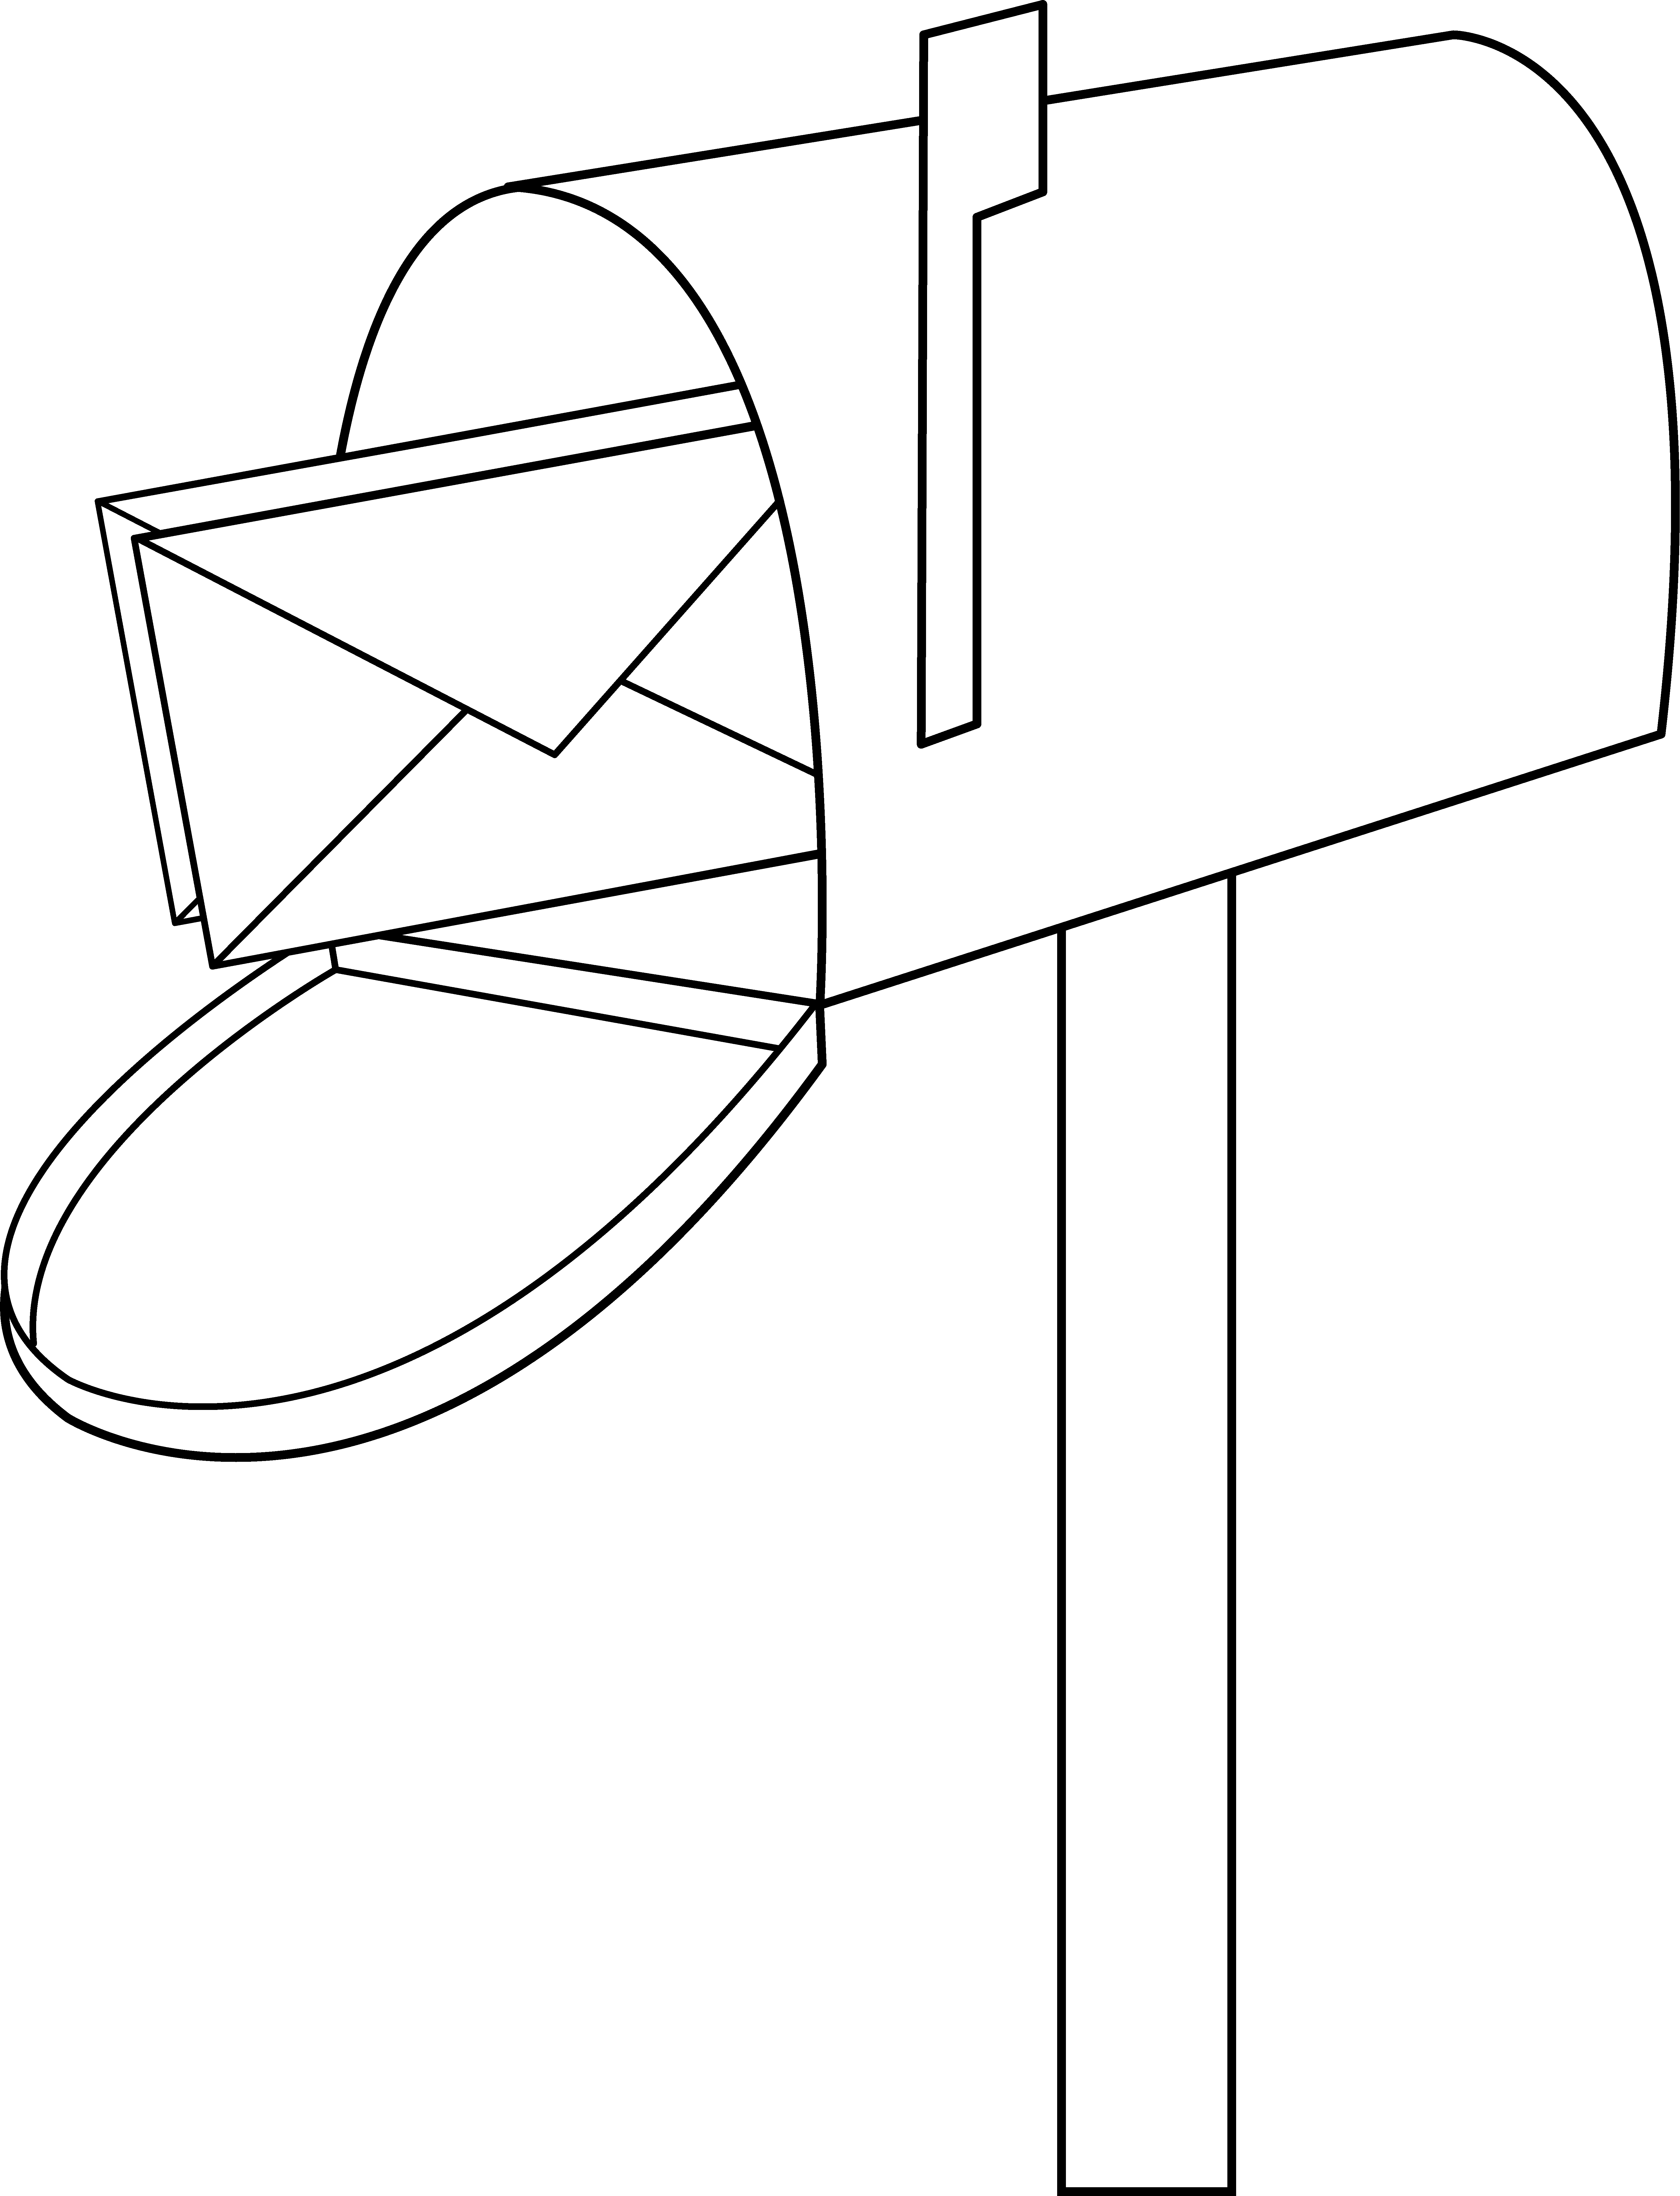 Mailbox pics of mail cartoon coloring page mail clip art black coloring pages coloring books coloring book pages